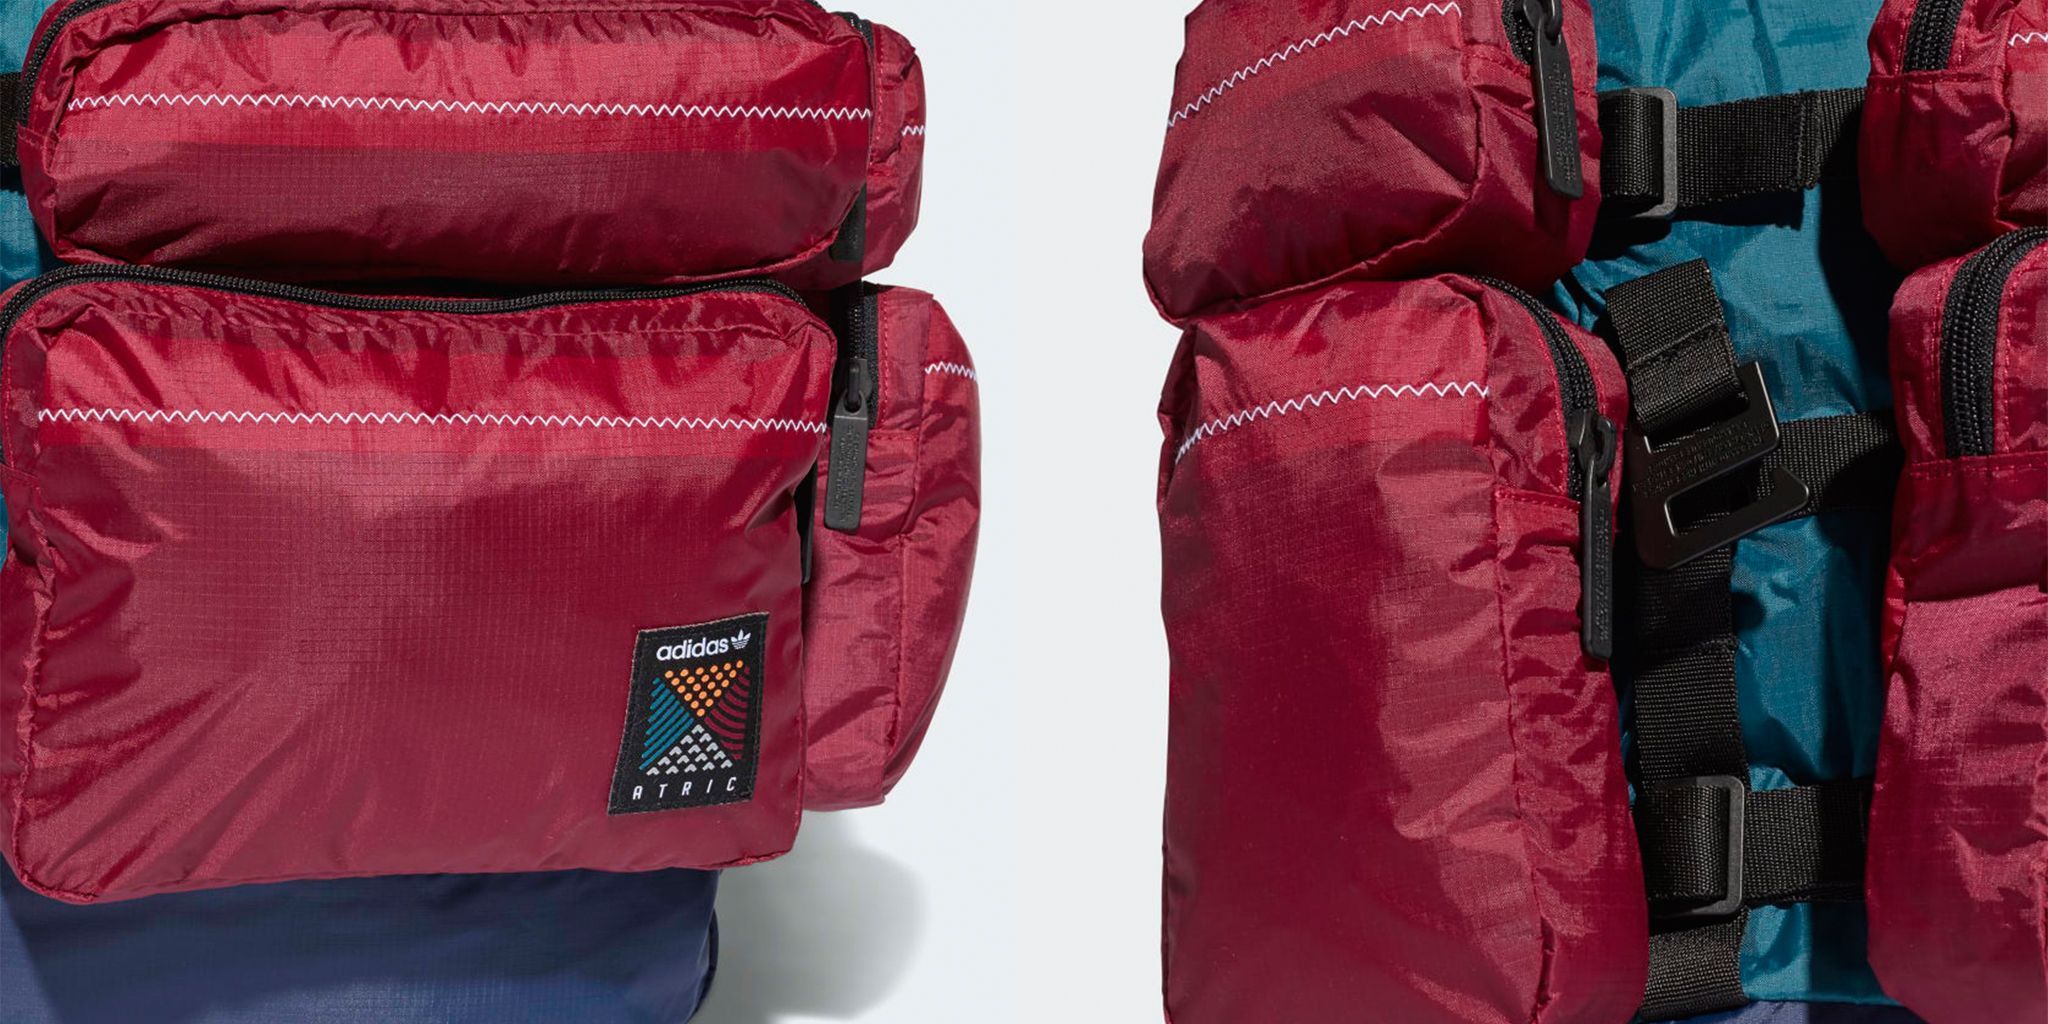 Titolo on Twitter: "available now ❗️adidas ATRIC BACKPACK 🔹Noble Indigo A  LARGE, HIGHLY ORGANISED BACKPACK INSPIRED BY HERITAGE OUTDOOR GEAR. SHOP  HERE ➡️➡️➡️ https://t.co/codSFRXXCa #adidas #adidasatric #ATRIC  https://t.co/7oHd8E8OjV" / Twitter